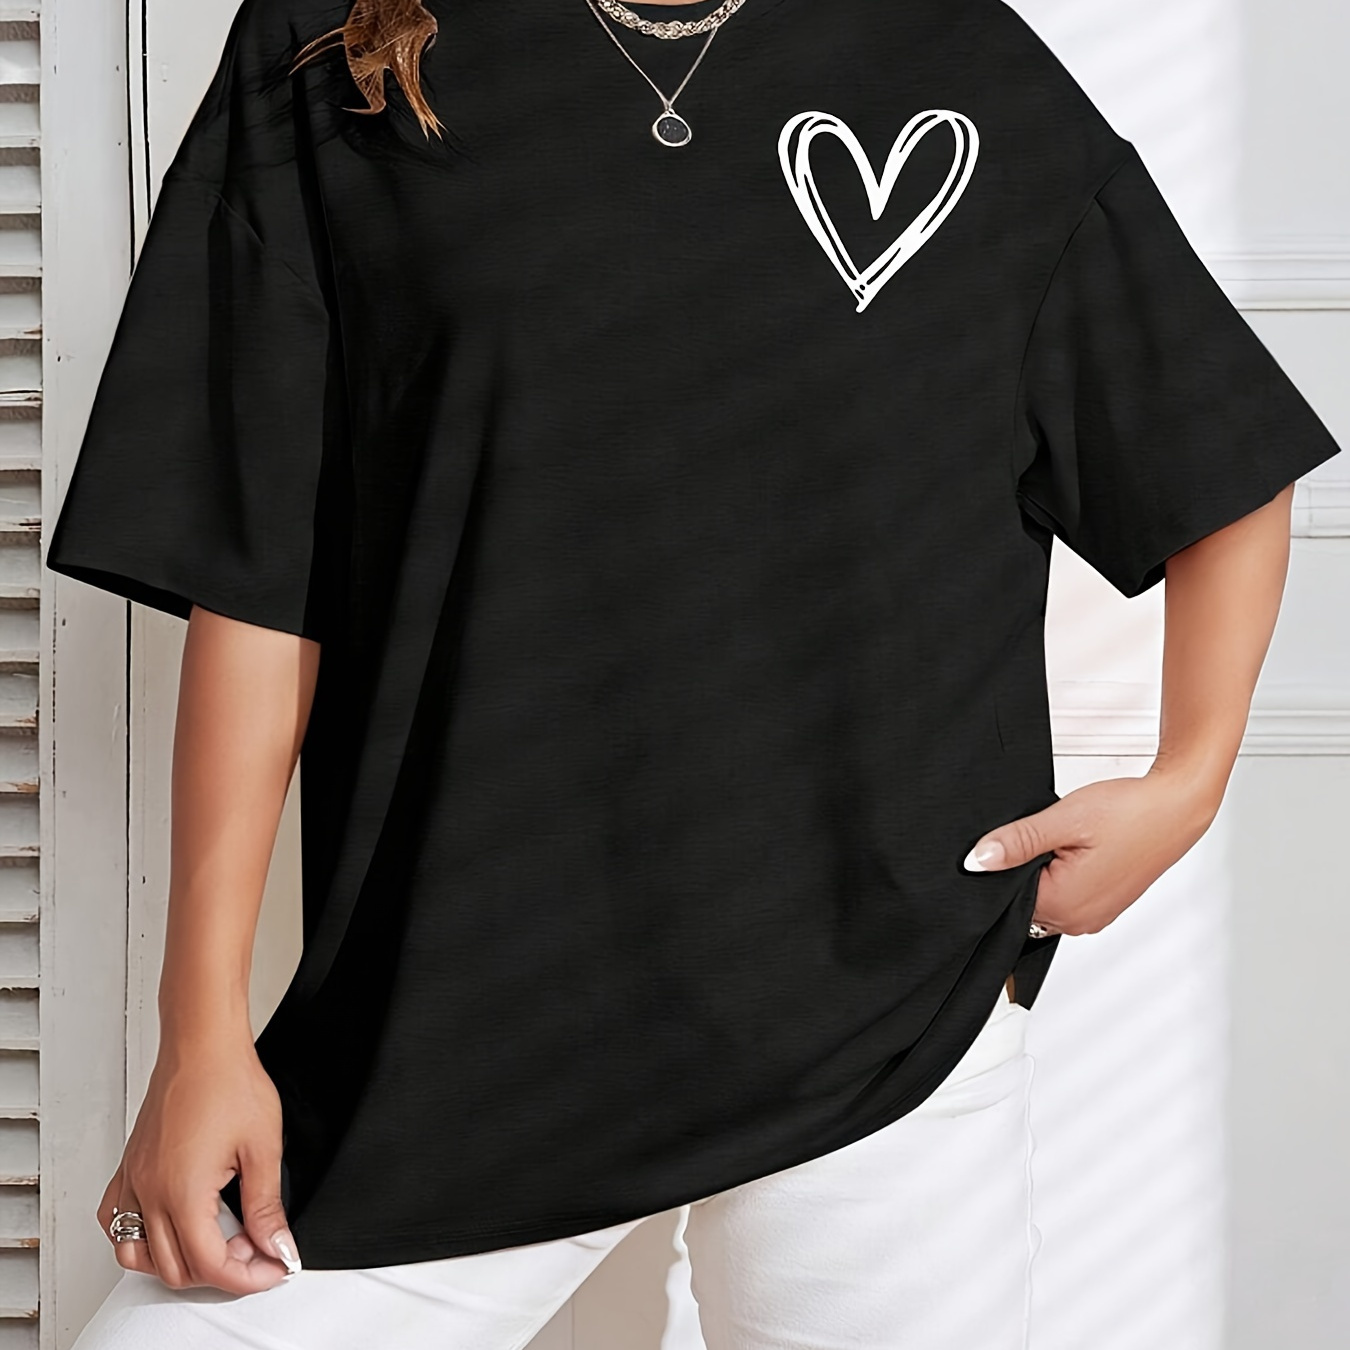 

Women's Casual Loose Fit T-shirt With Heart Print, Short Sleeve, Round Neck, Athletic Style, Breathable Sporty Tee